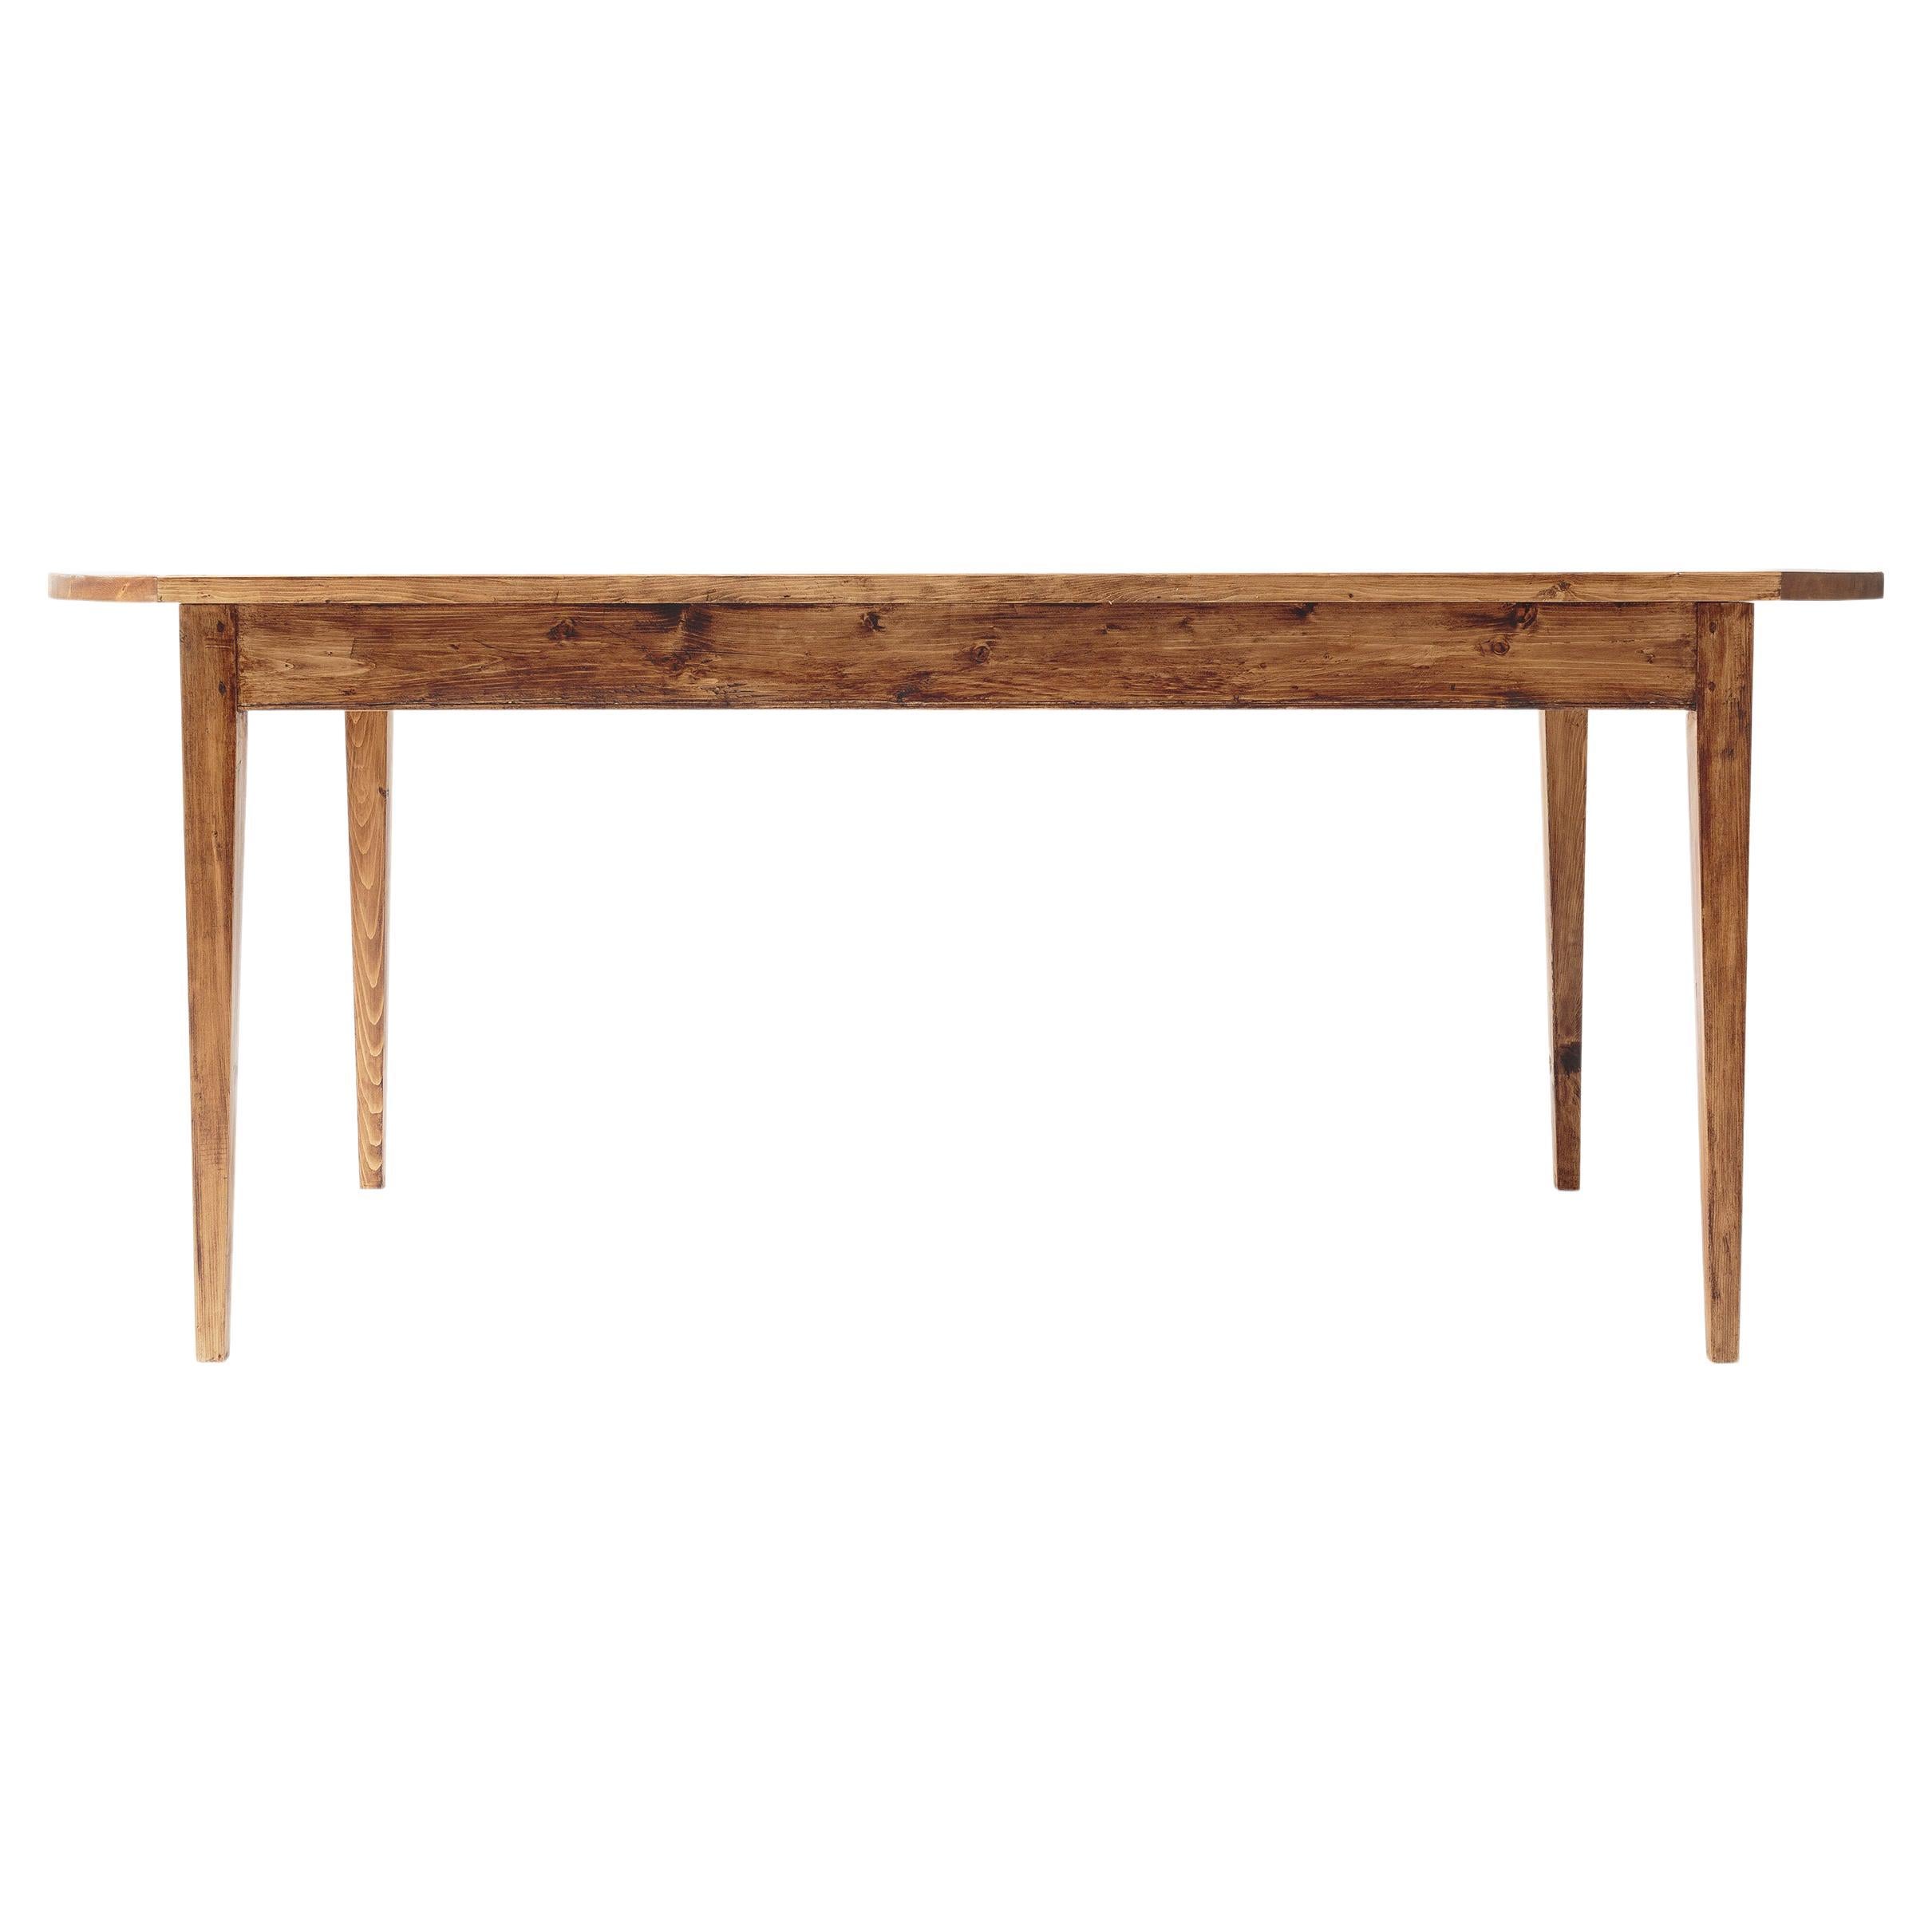 Adair Table, Refined English Rustic Dining Table in Pine For Sale